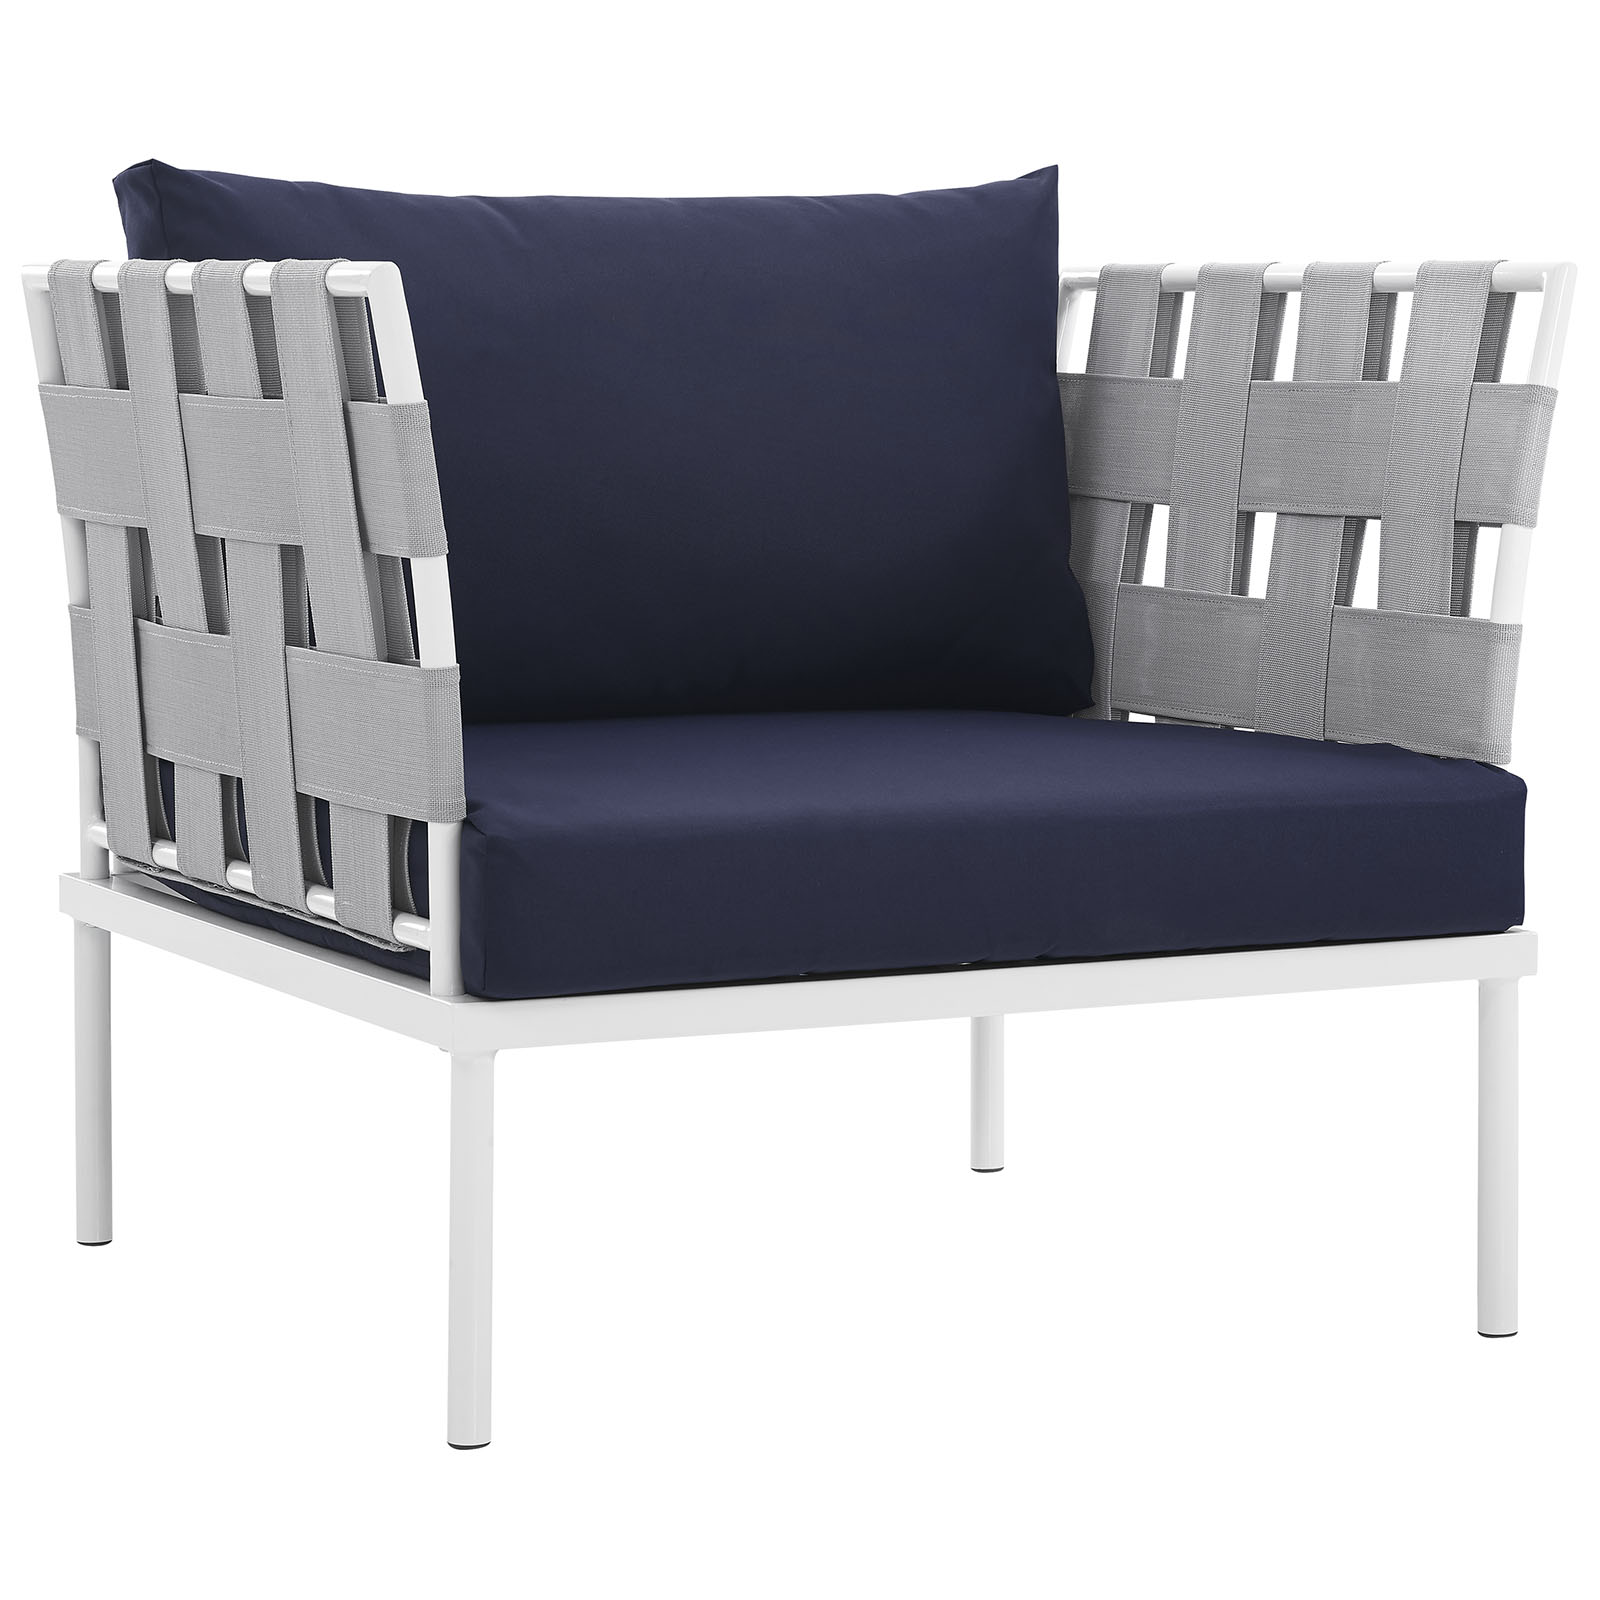 Modern Contemporary Urban Design Outdoor Patio Balcony Lounge Chair, Navy Blue White, Rattan - image 1 of 5